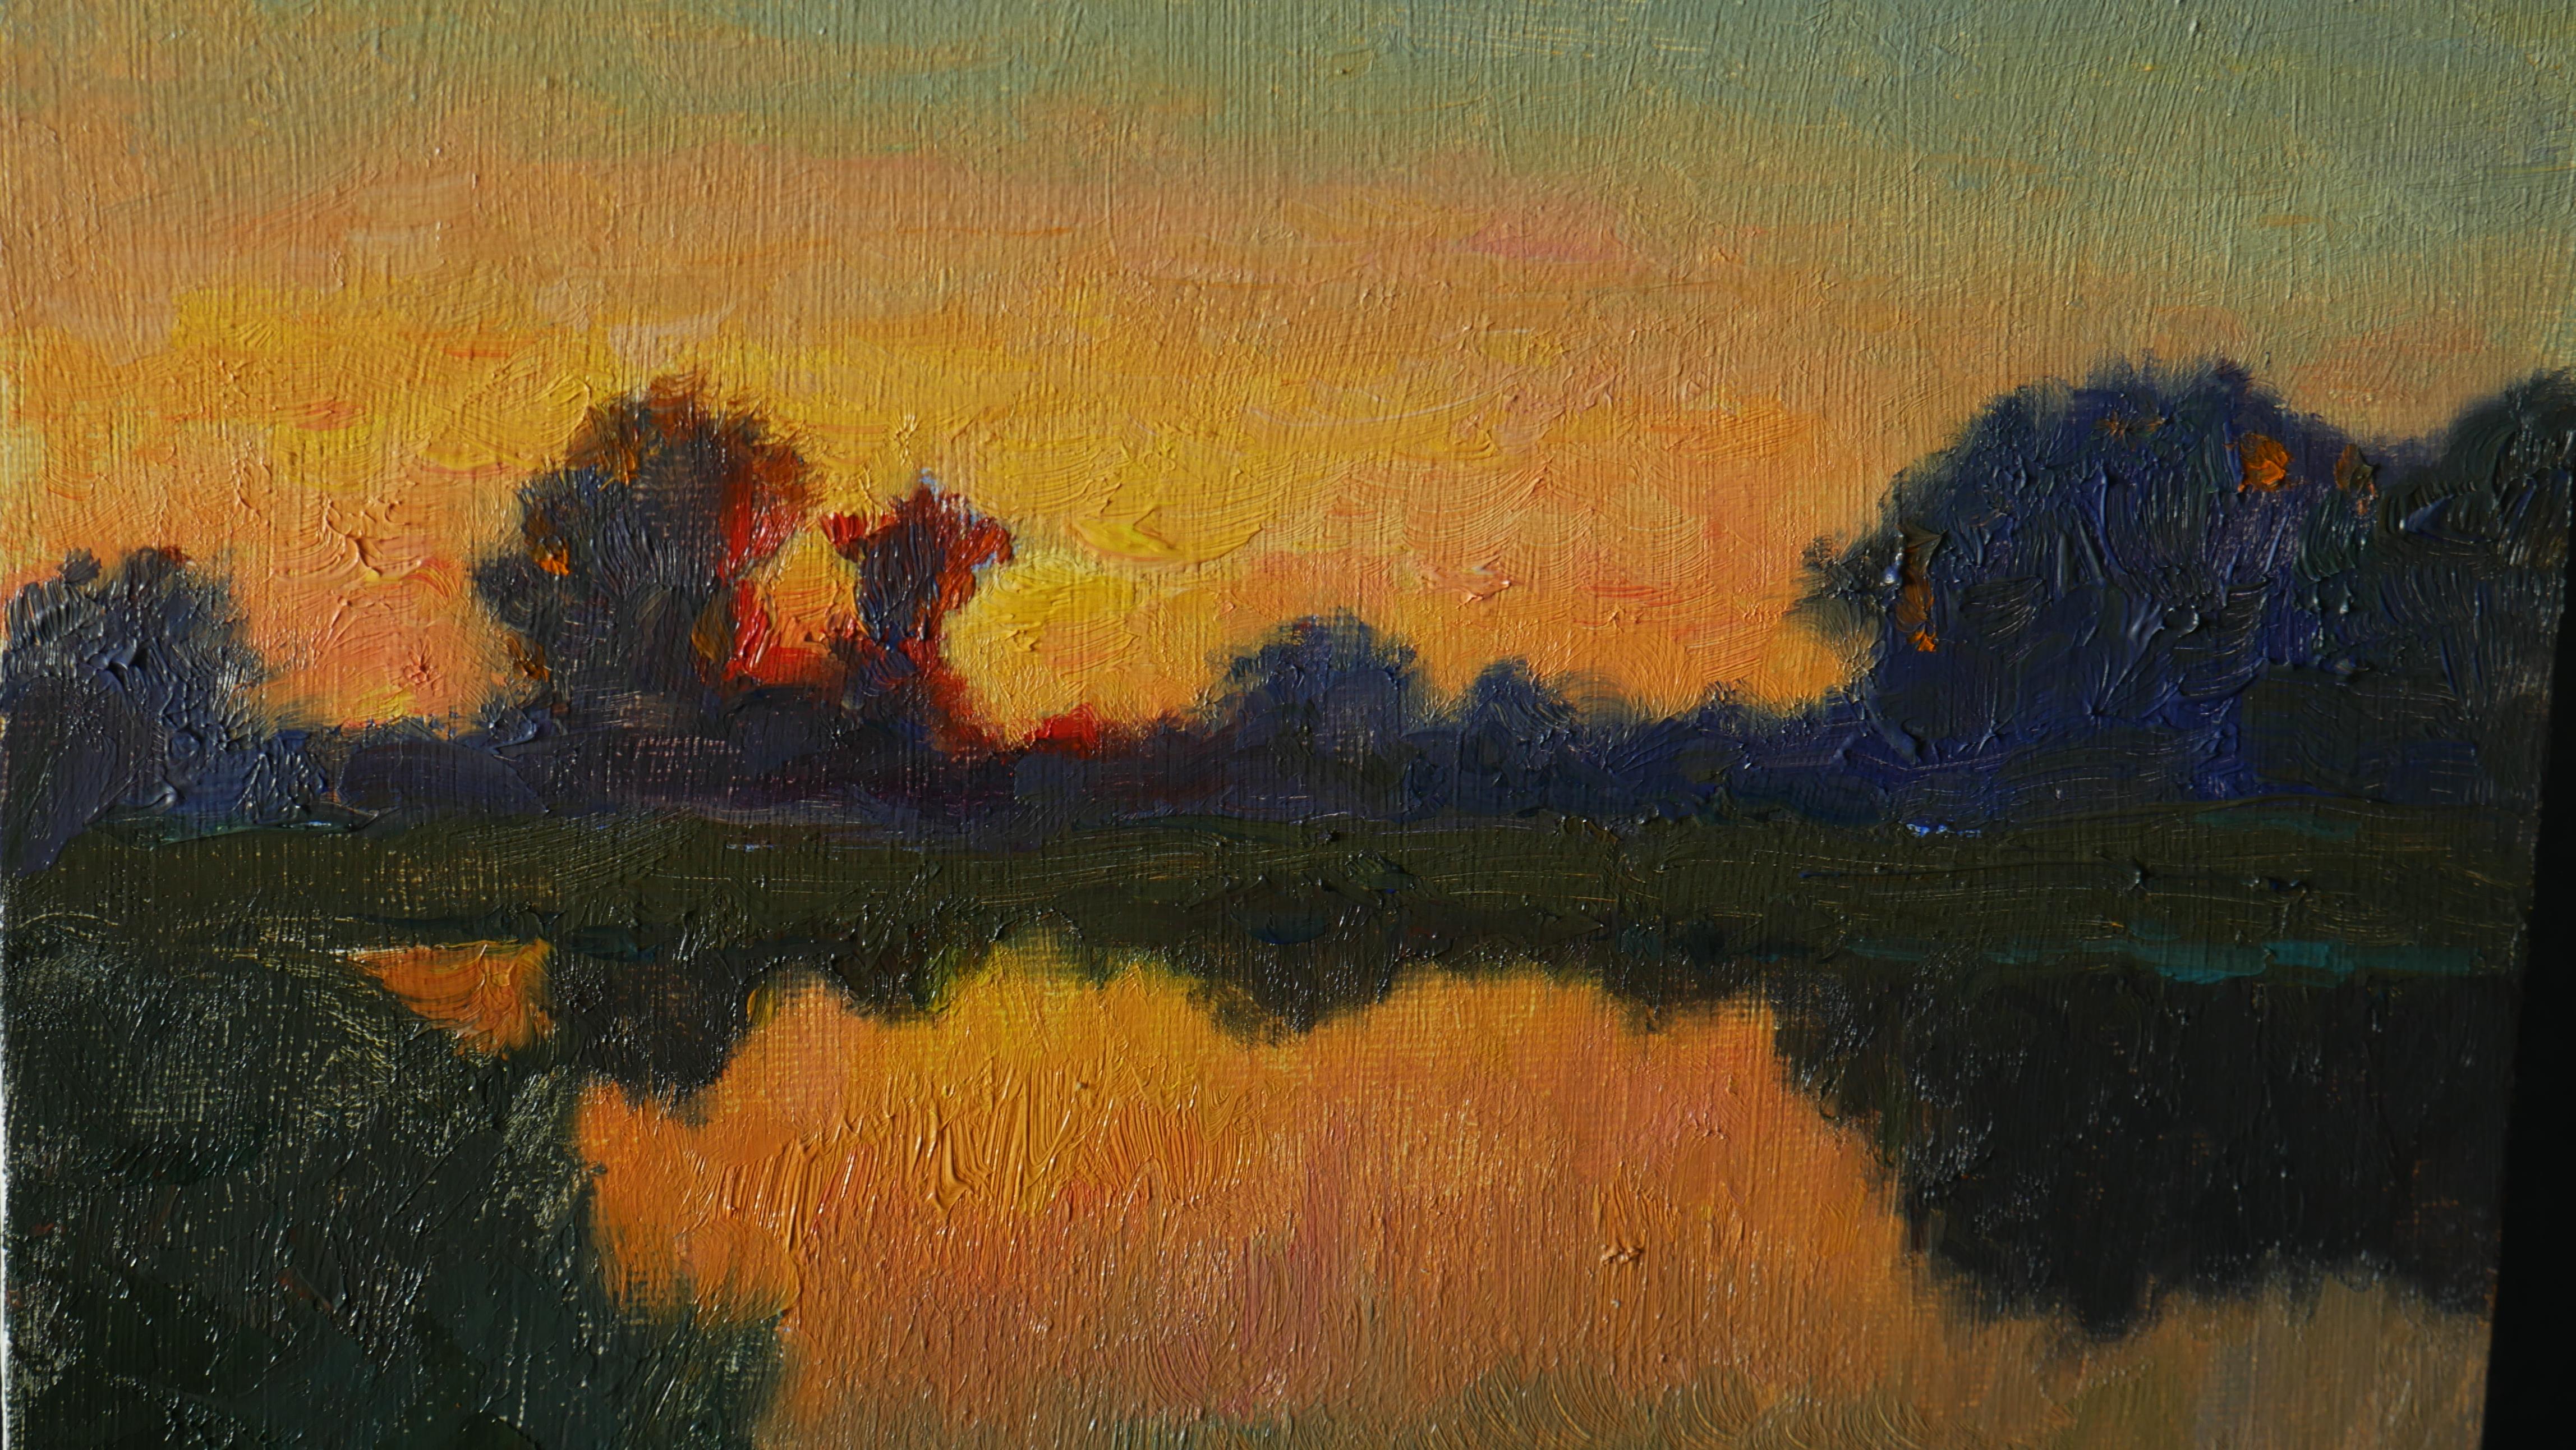 The evening impressionist painting with the pond and the setting Sun is a beautiful wall decor, the painting is full of different colours, combinations of warm and cold shades are professionally captured by the artist. The artwork is created en